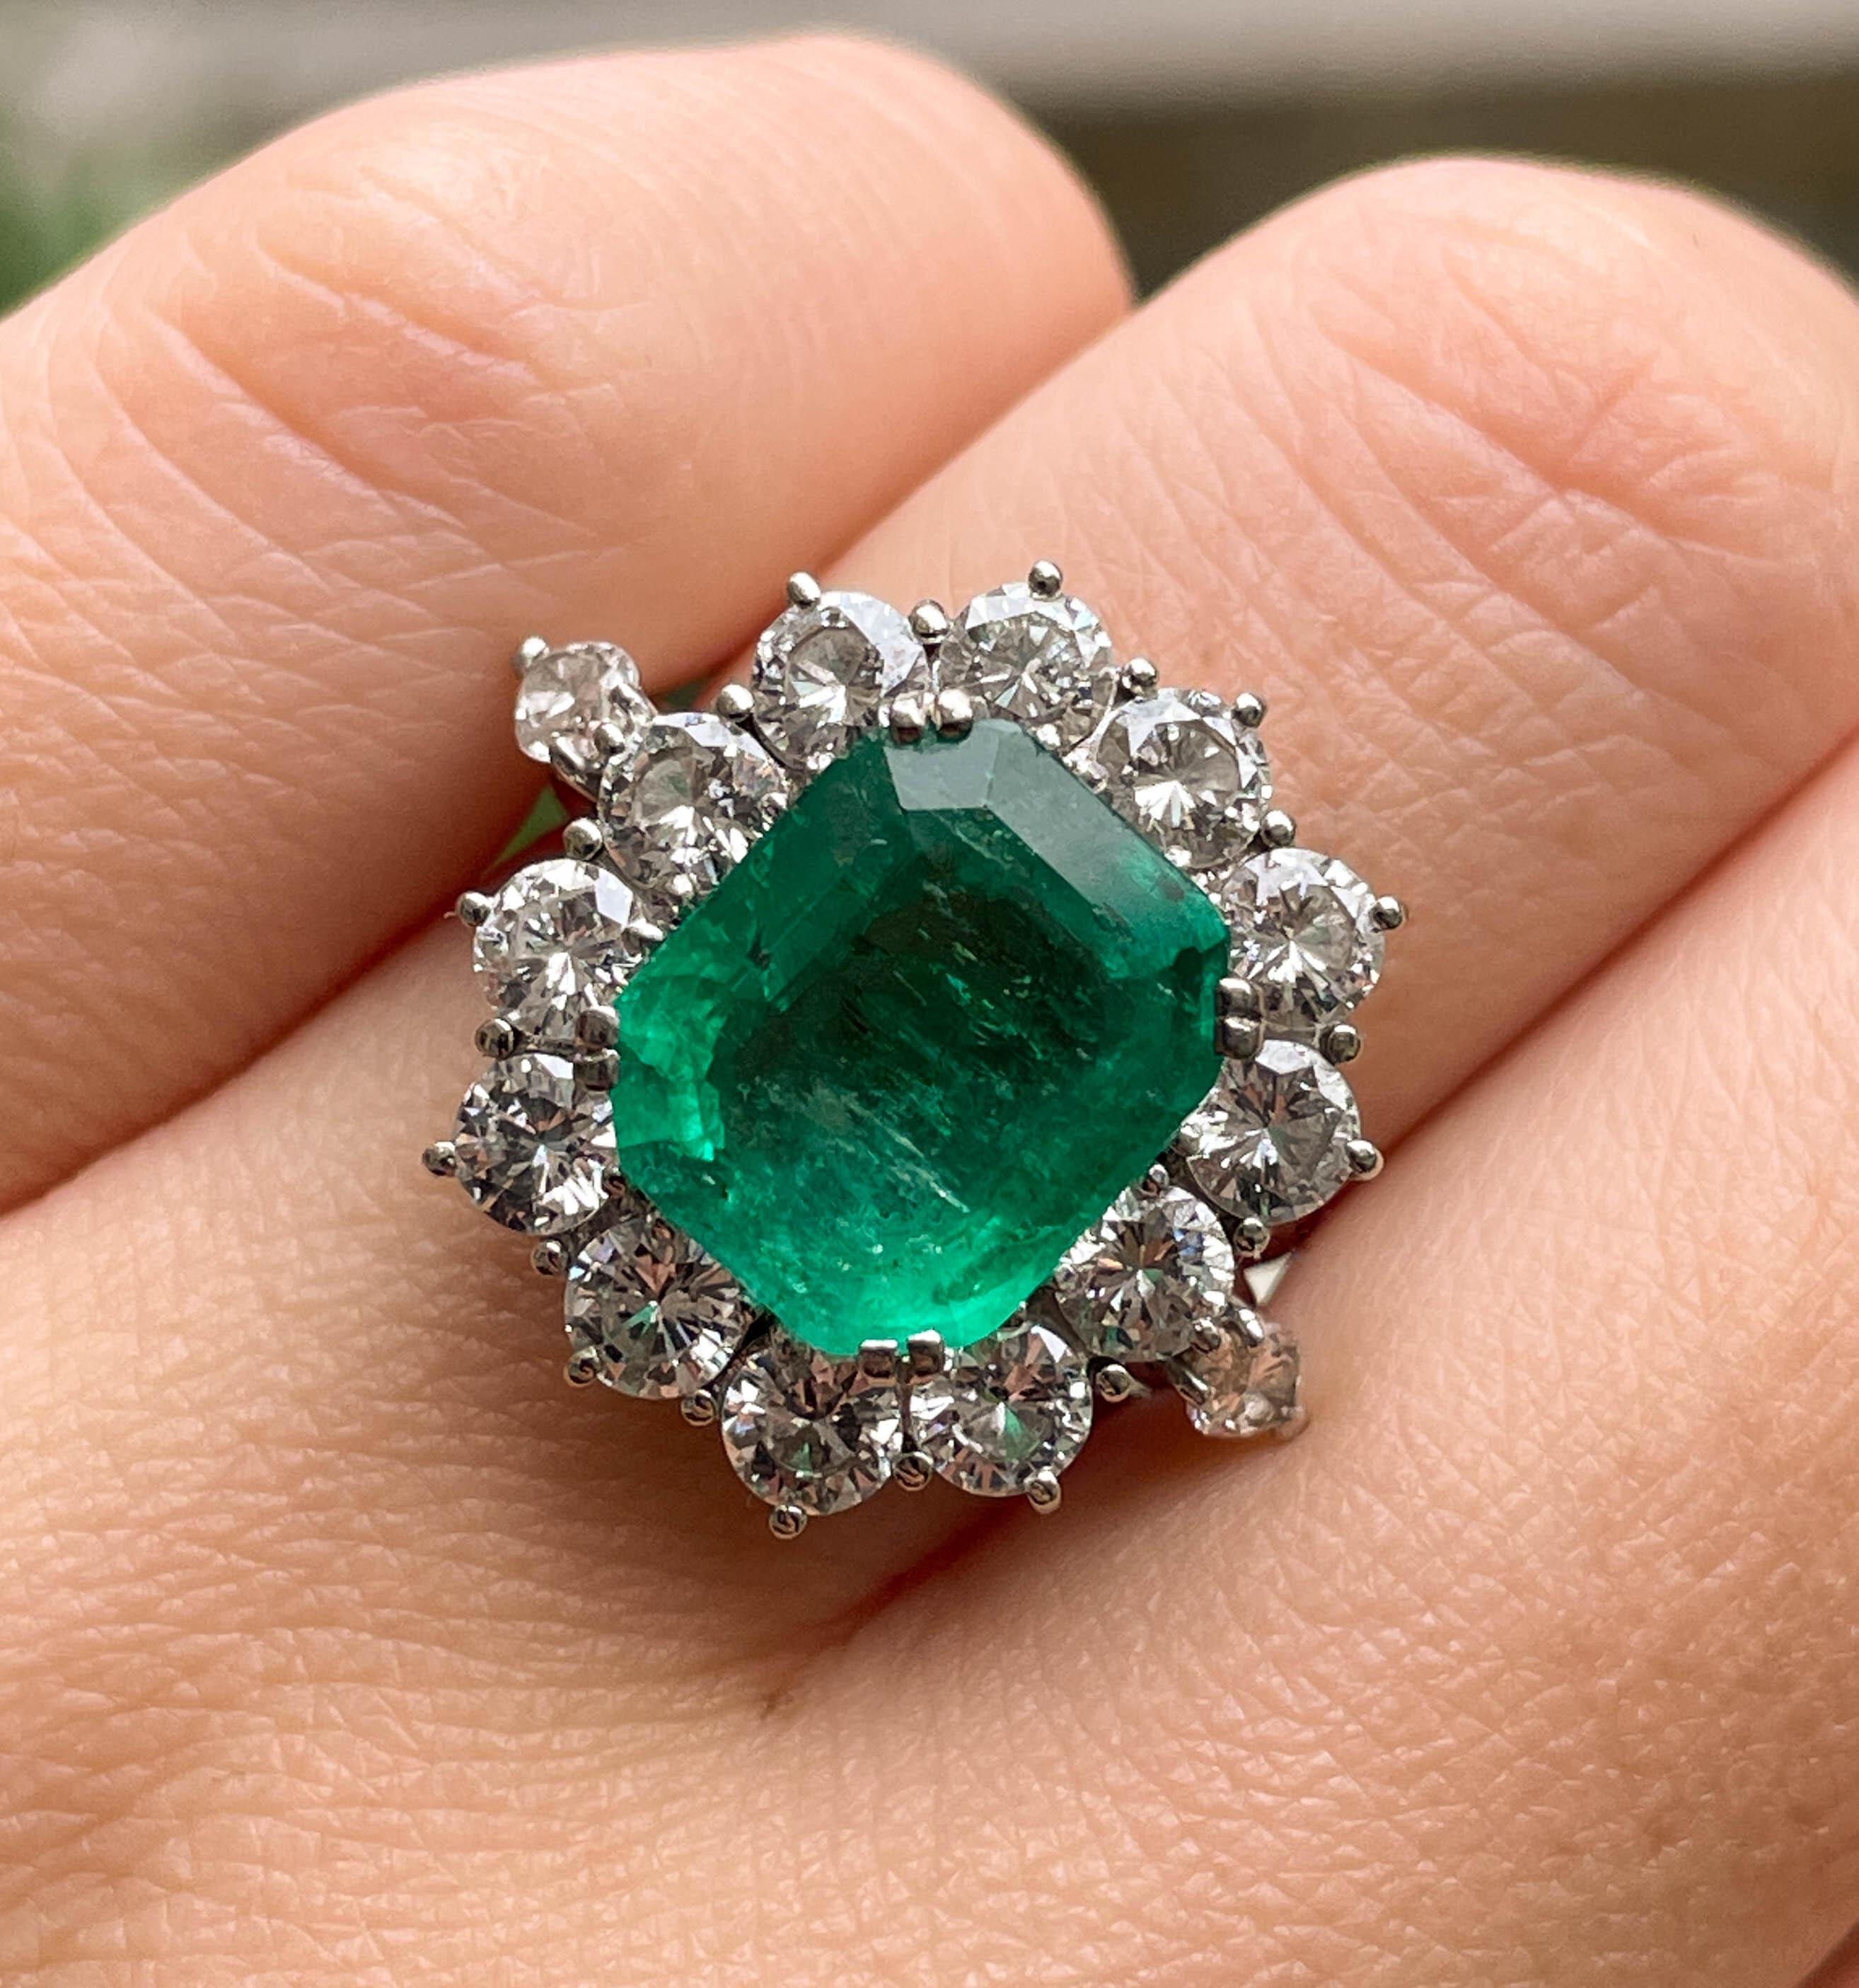 Gorgeous Timeless Vintage ITALIAN-MADE 18k White Gold (stamped) Green Emerald and Diamond Engagement Cluster Ring. The Center Stone is GIA Certified 3.65ct Natural COLOMBIAN Octagonal Step cut Green Emerald. Mesmerizing Transparent Green! The